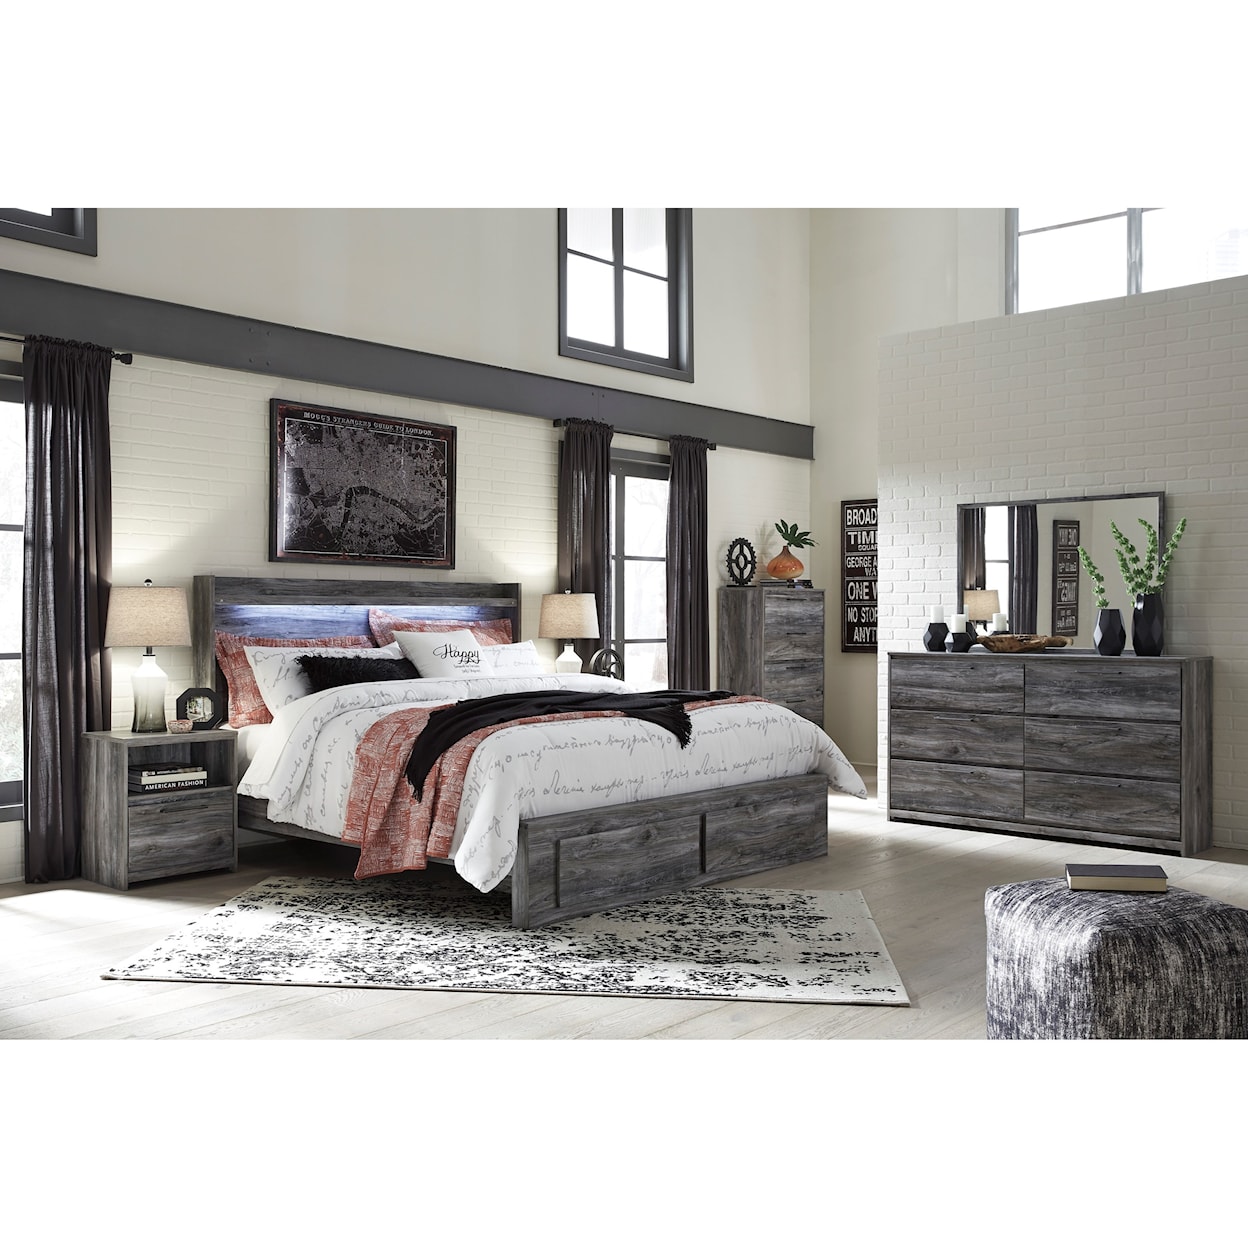 Ashley Furniture Signature Design Baystorm King Panel Bed with Storage Footboard